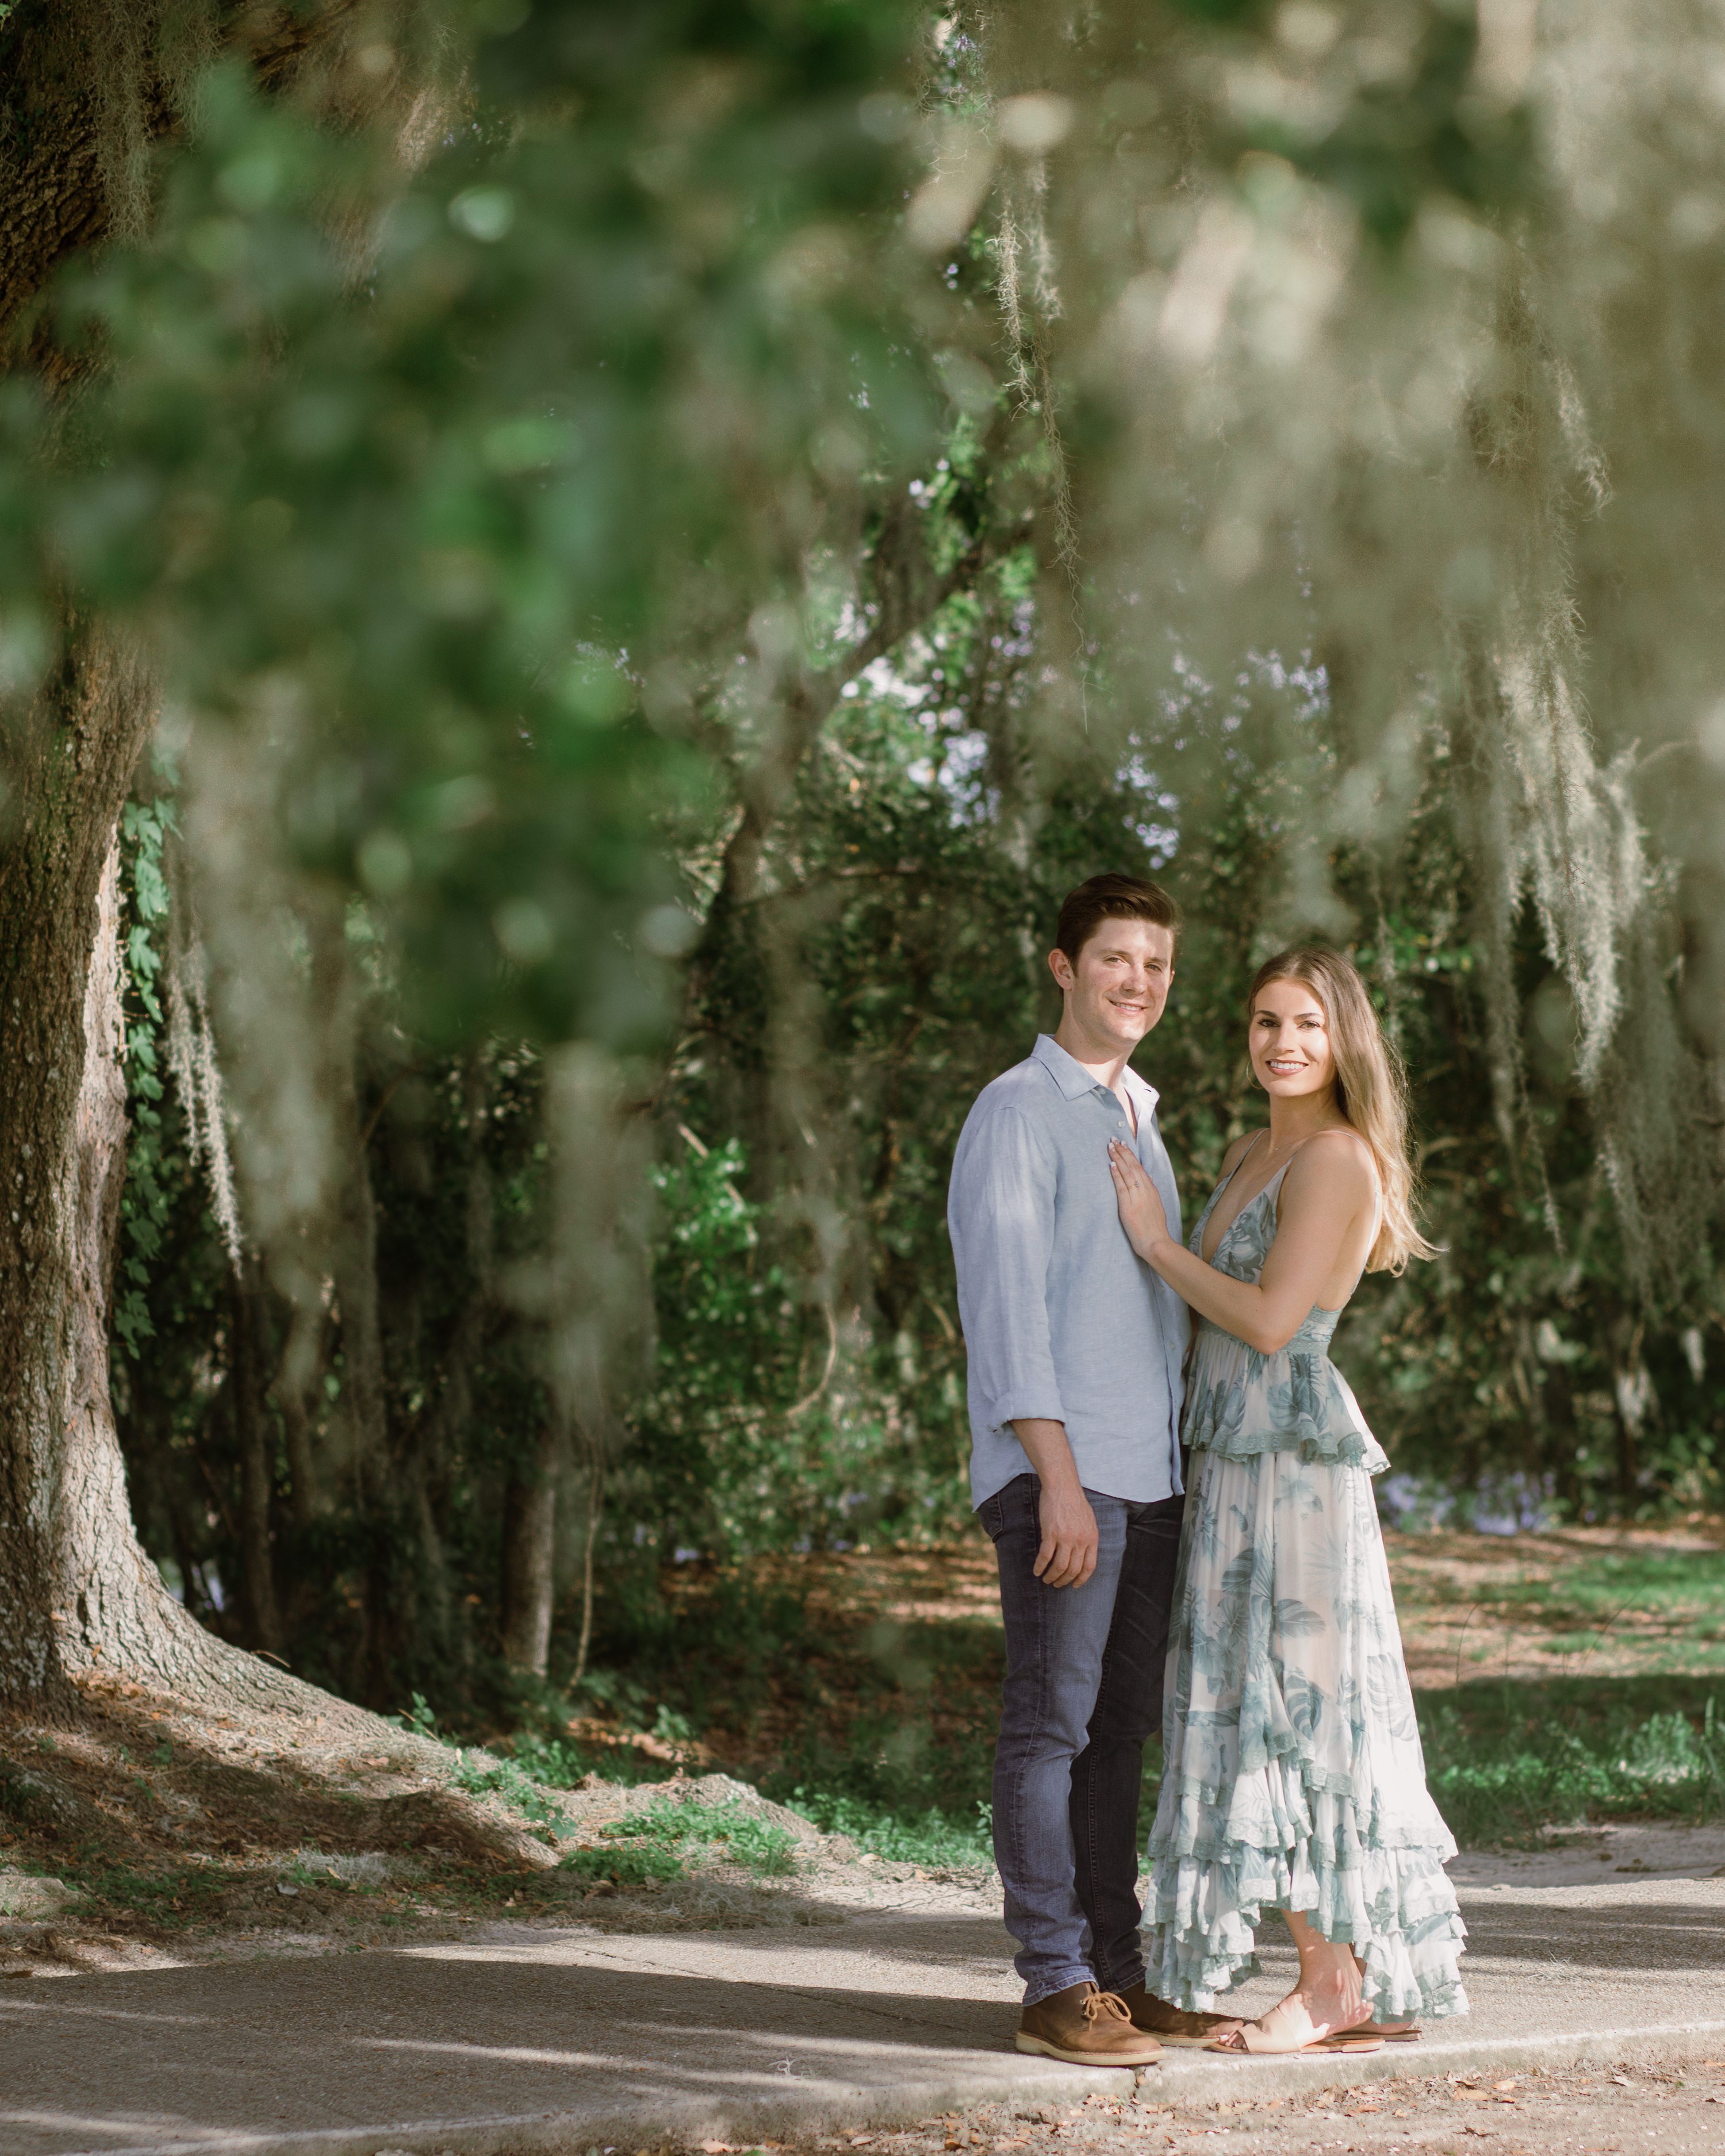 Engagement photos at the fly,New Orleans Couples Photos